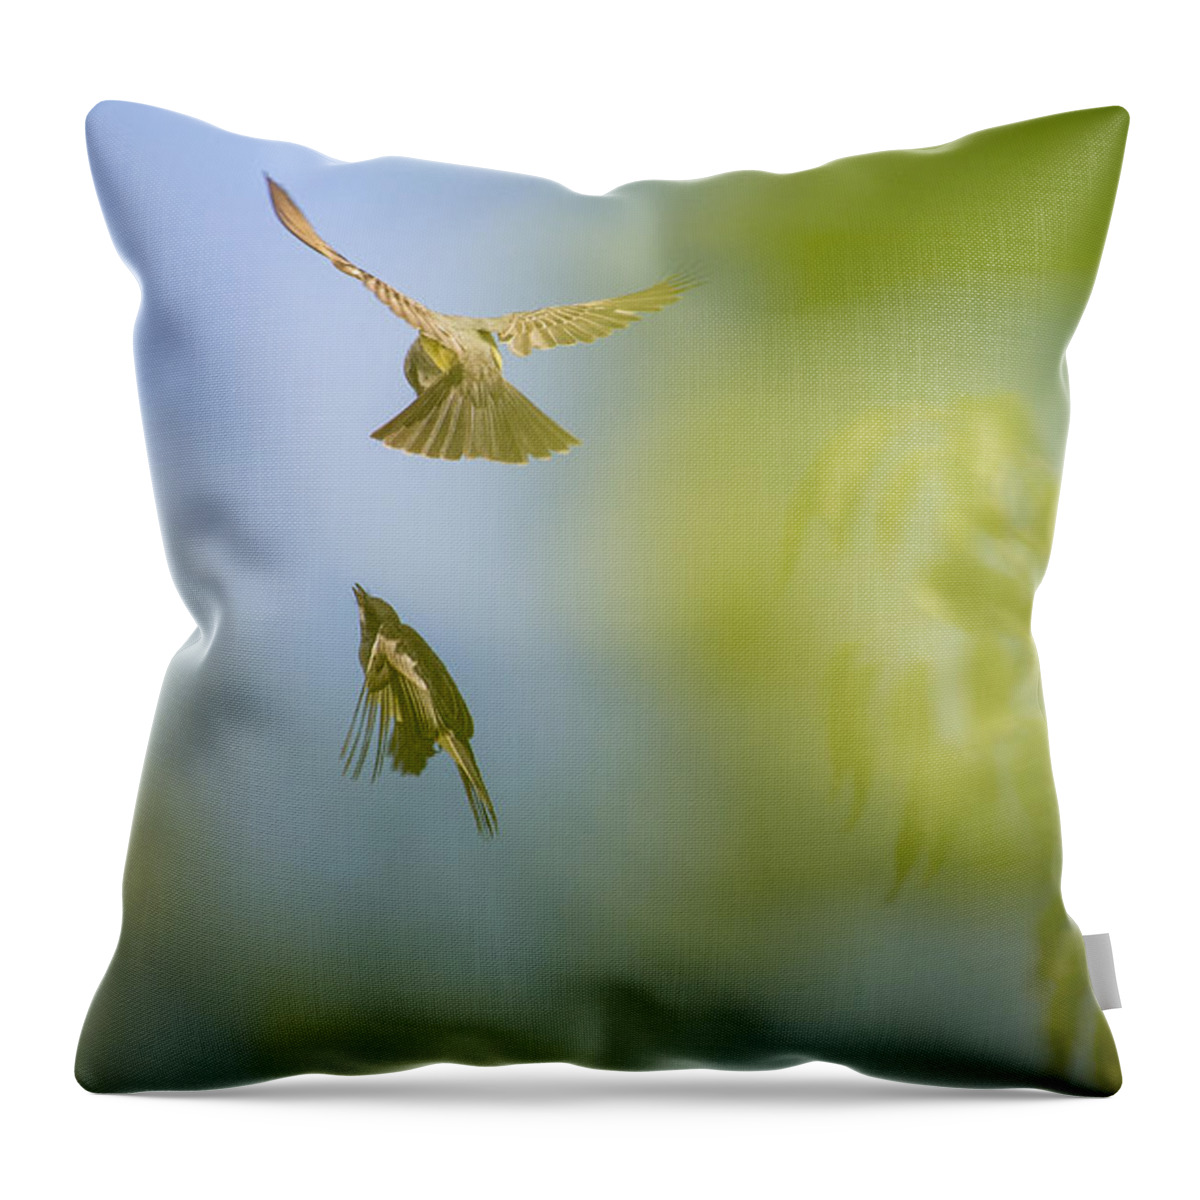 Abstract Throw Pillow featuring the photograph Backyard by Amanda Rimmer